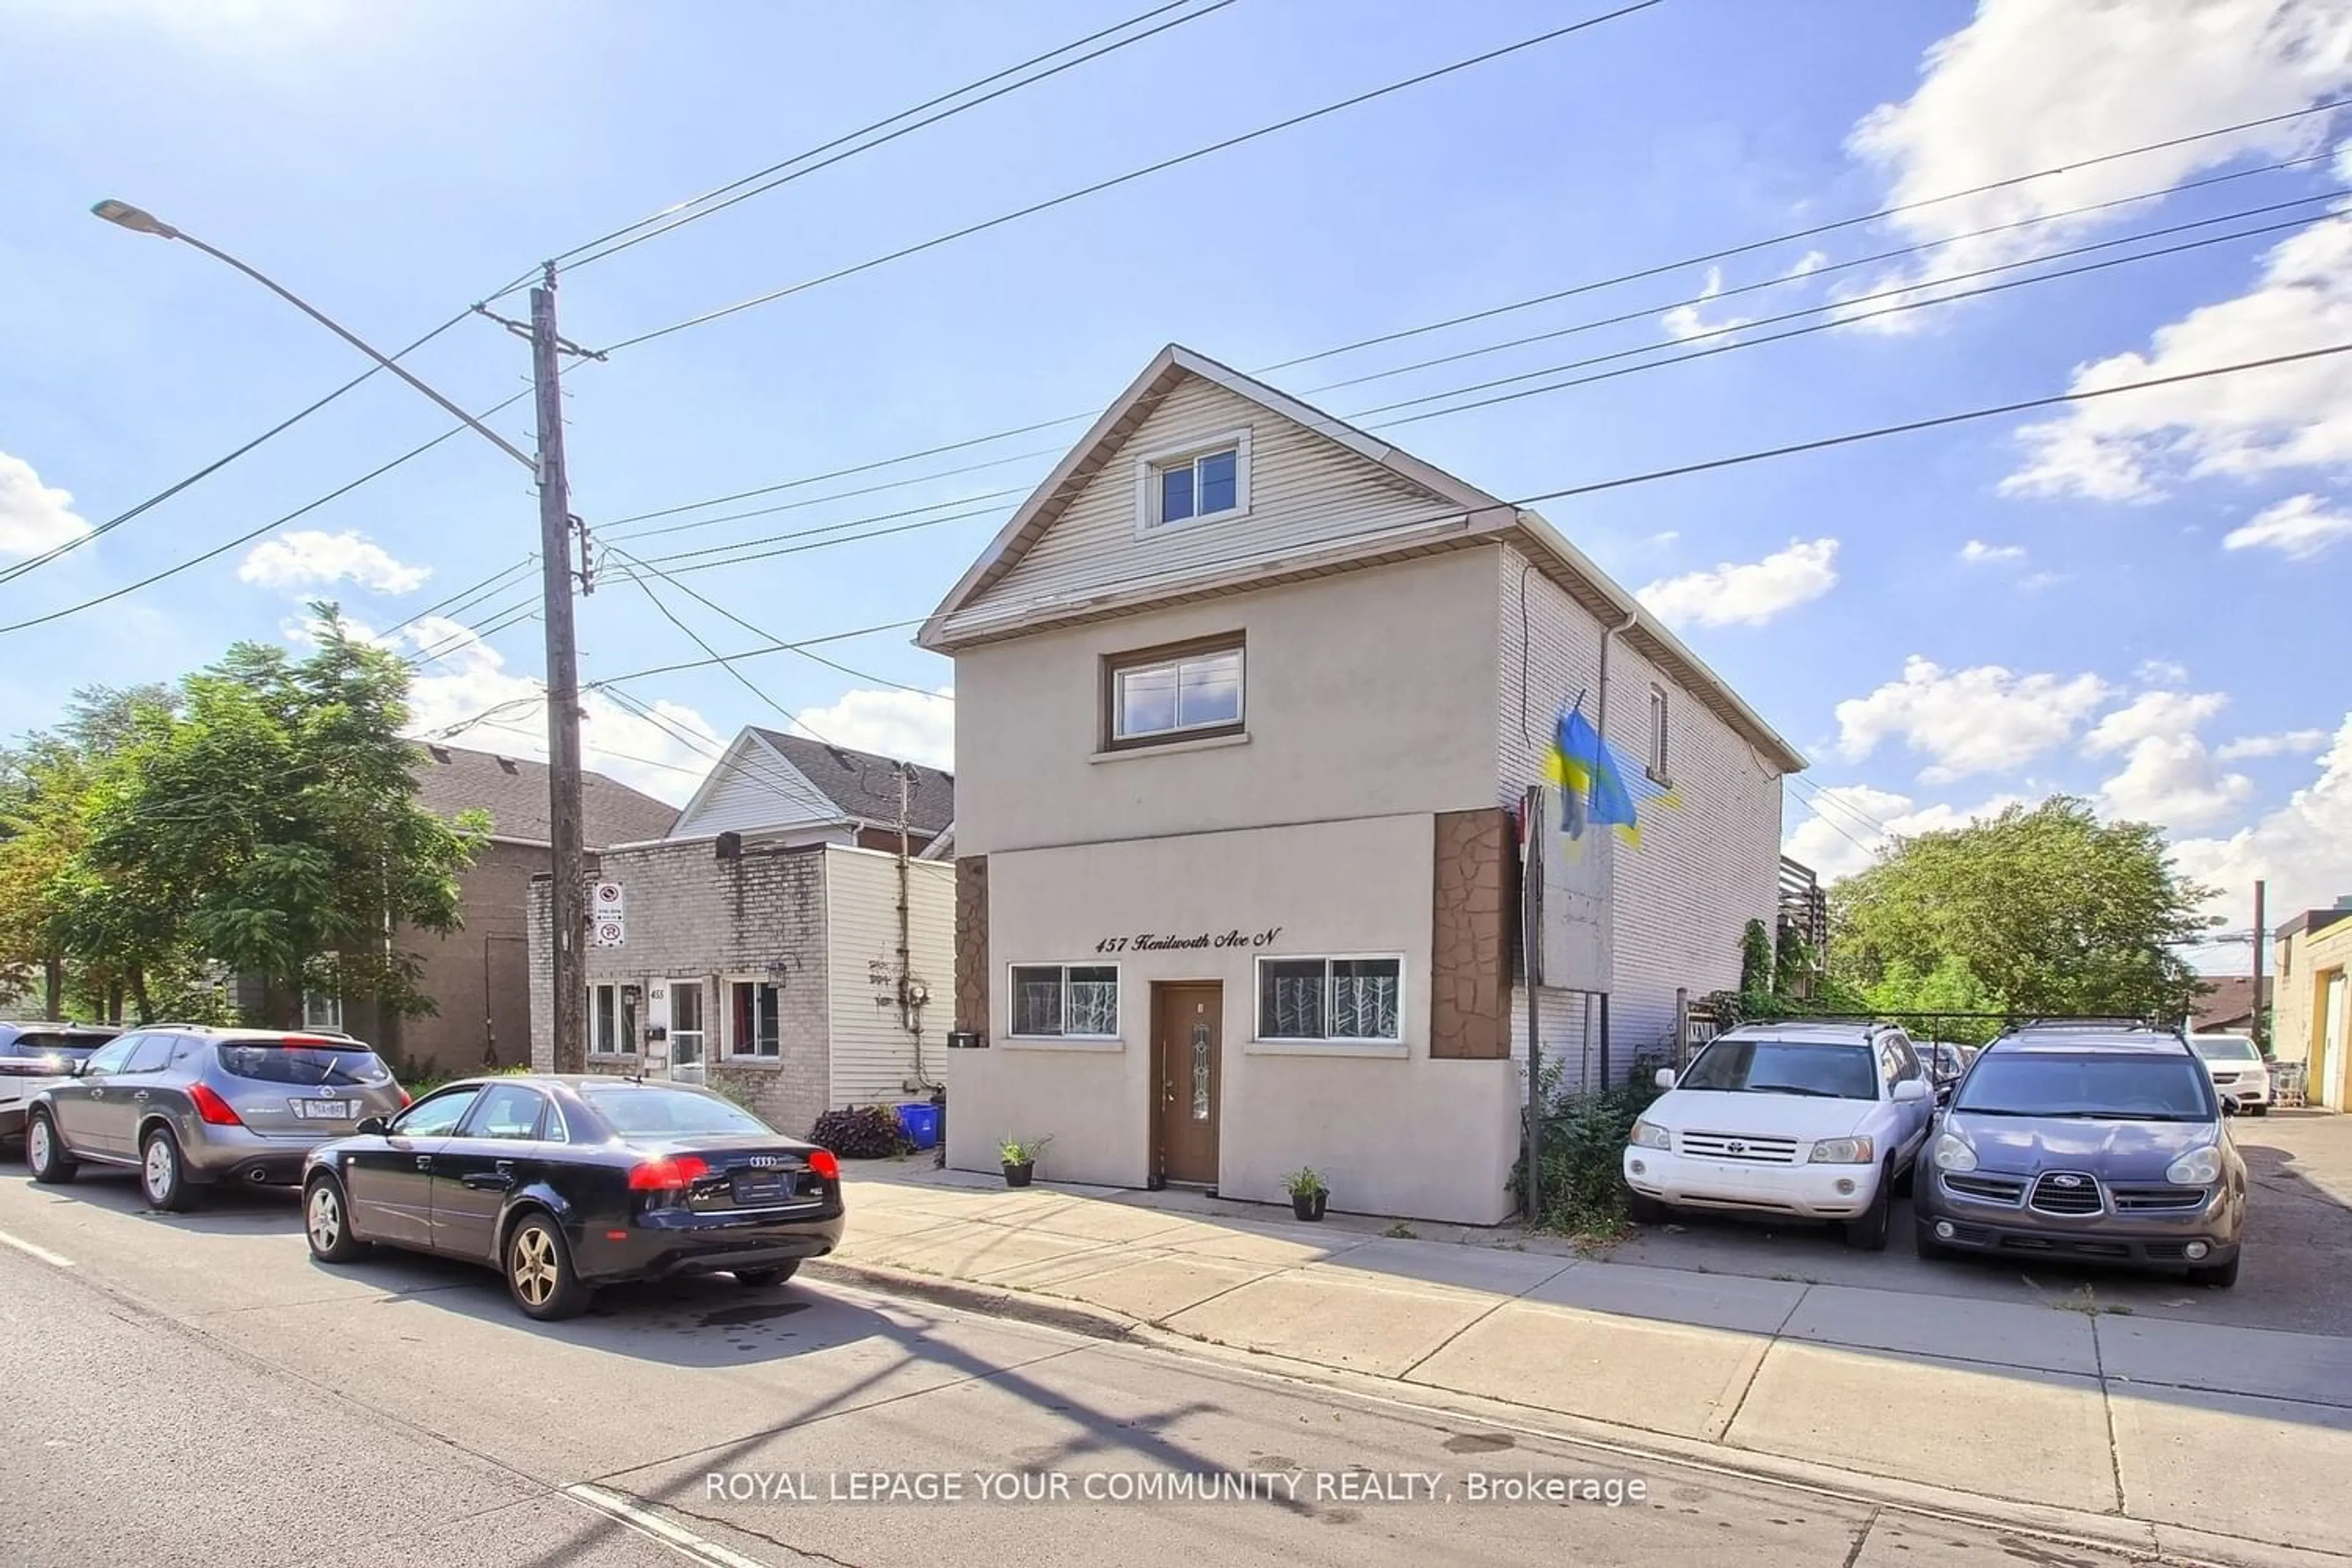 Street view for 457 Kenilworth Ave, Hamilton Ontario L8H 4T5